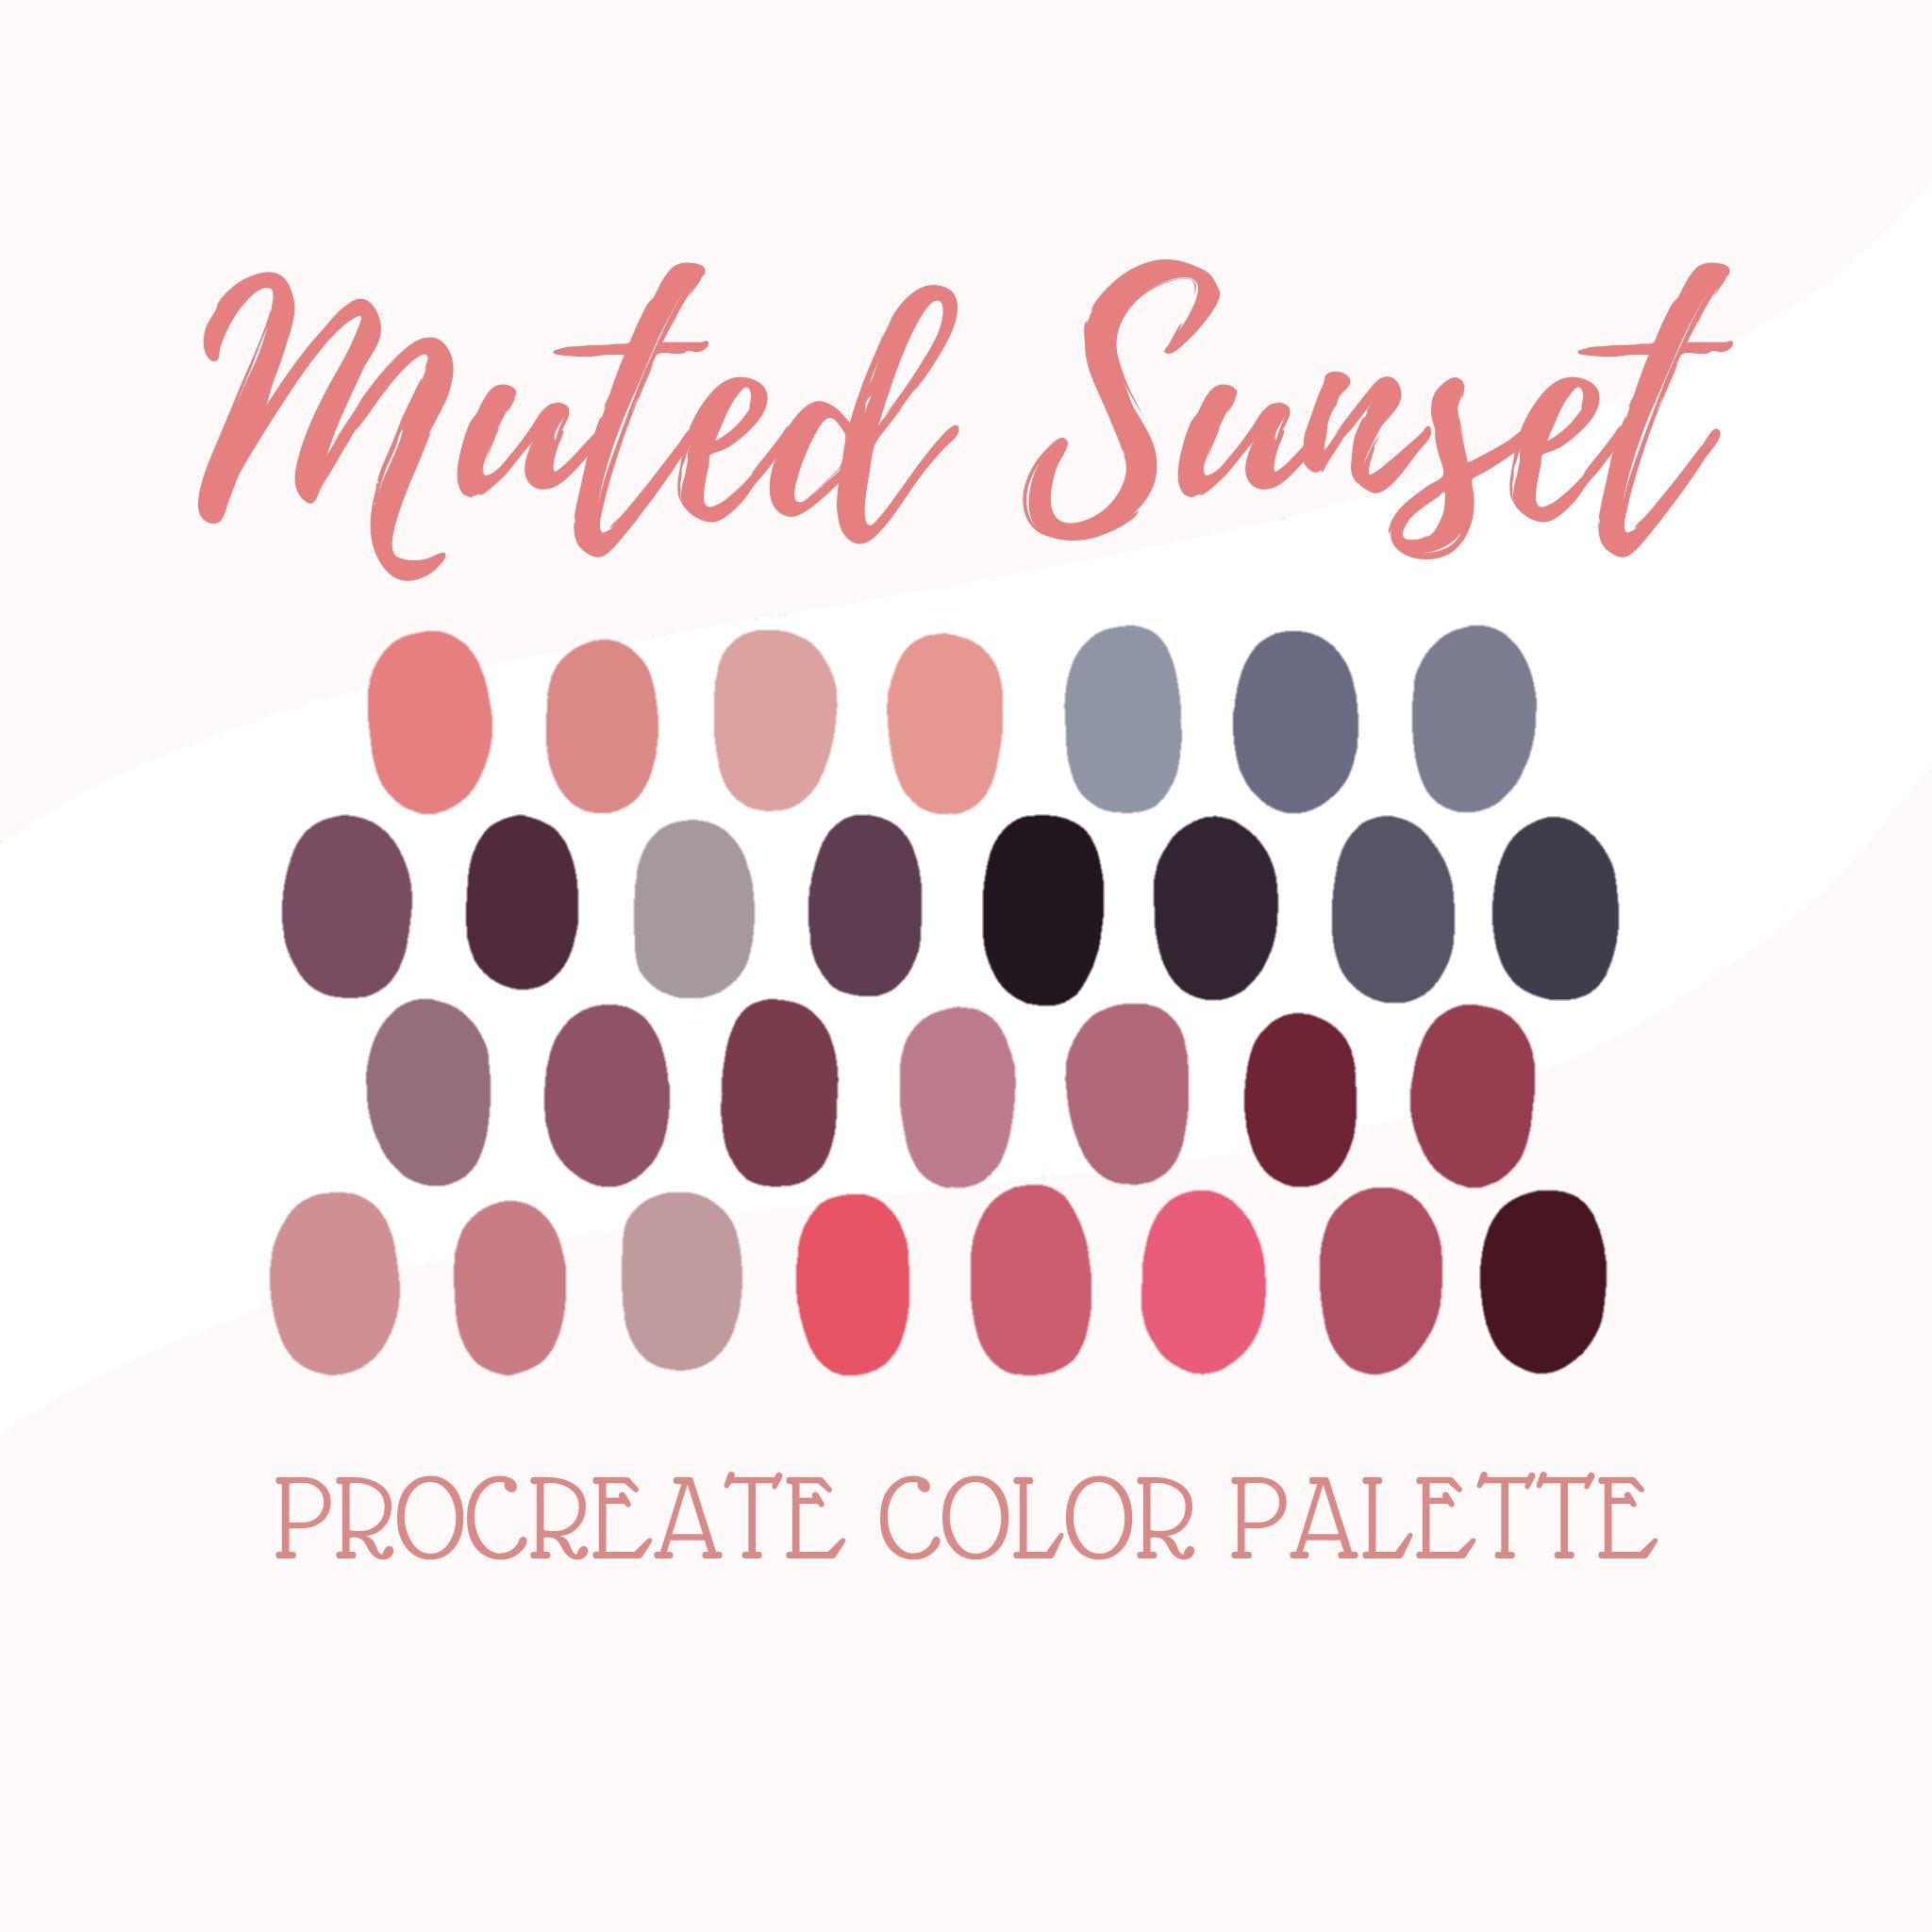 Procreate Color Palette – Muted Sunset